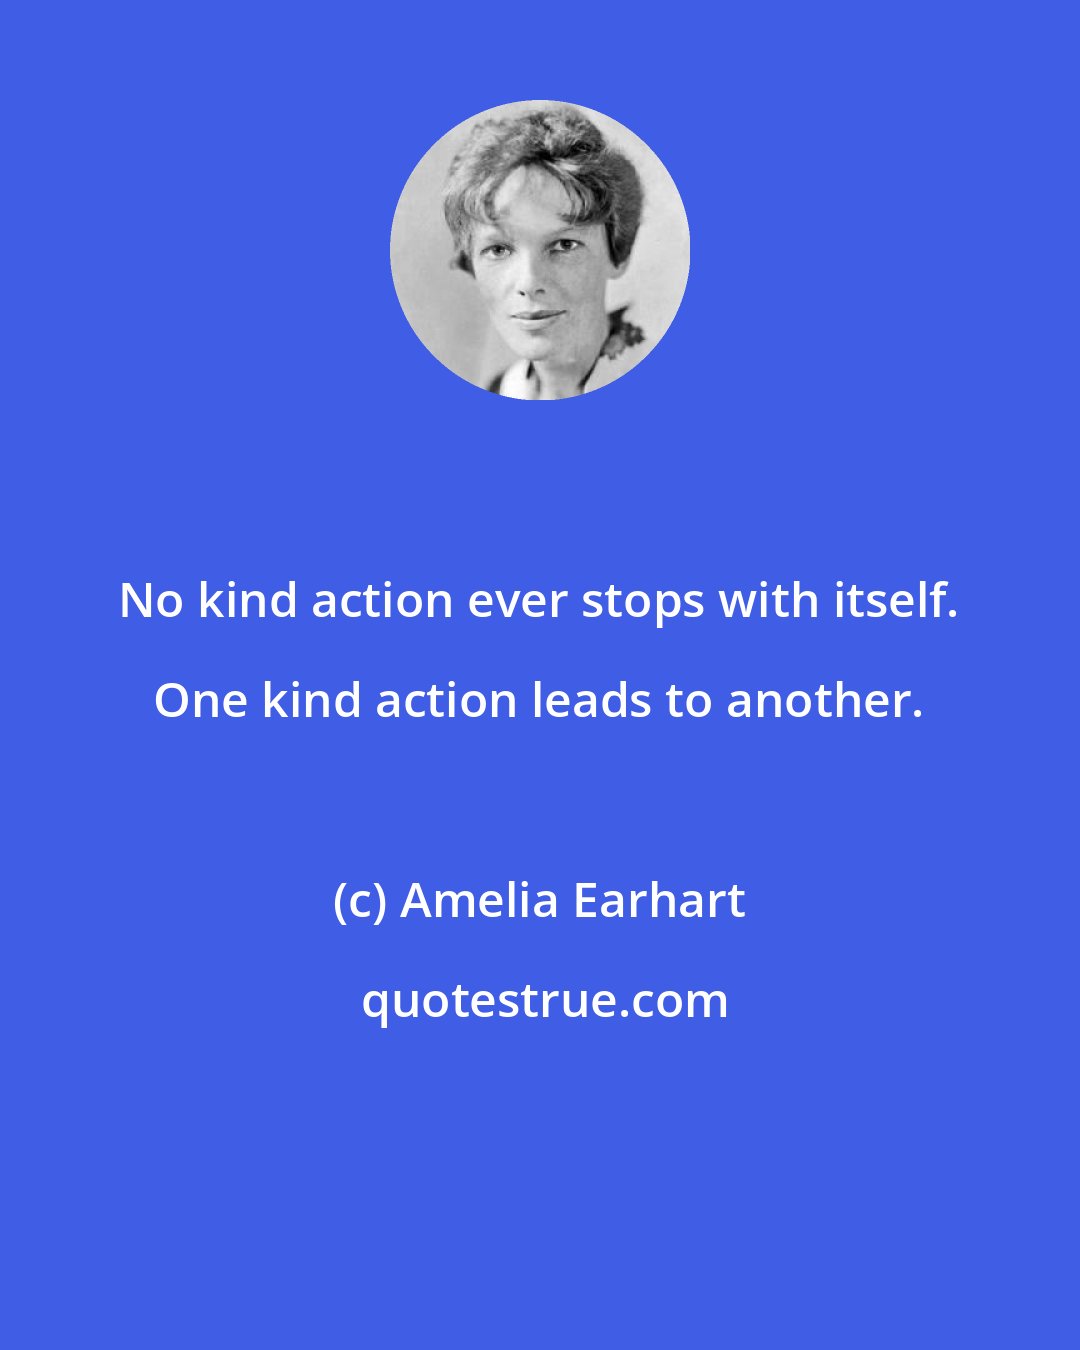 Amelia Earhart: No kind action ever stops with itself. One kind action leads to another.